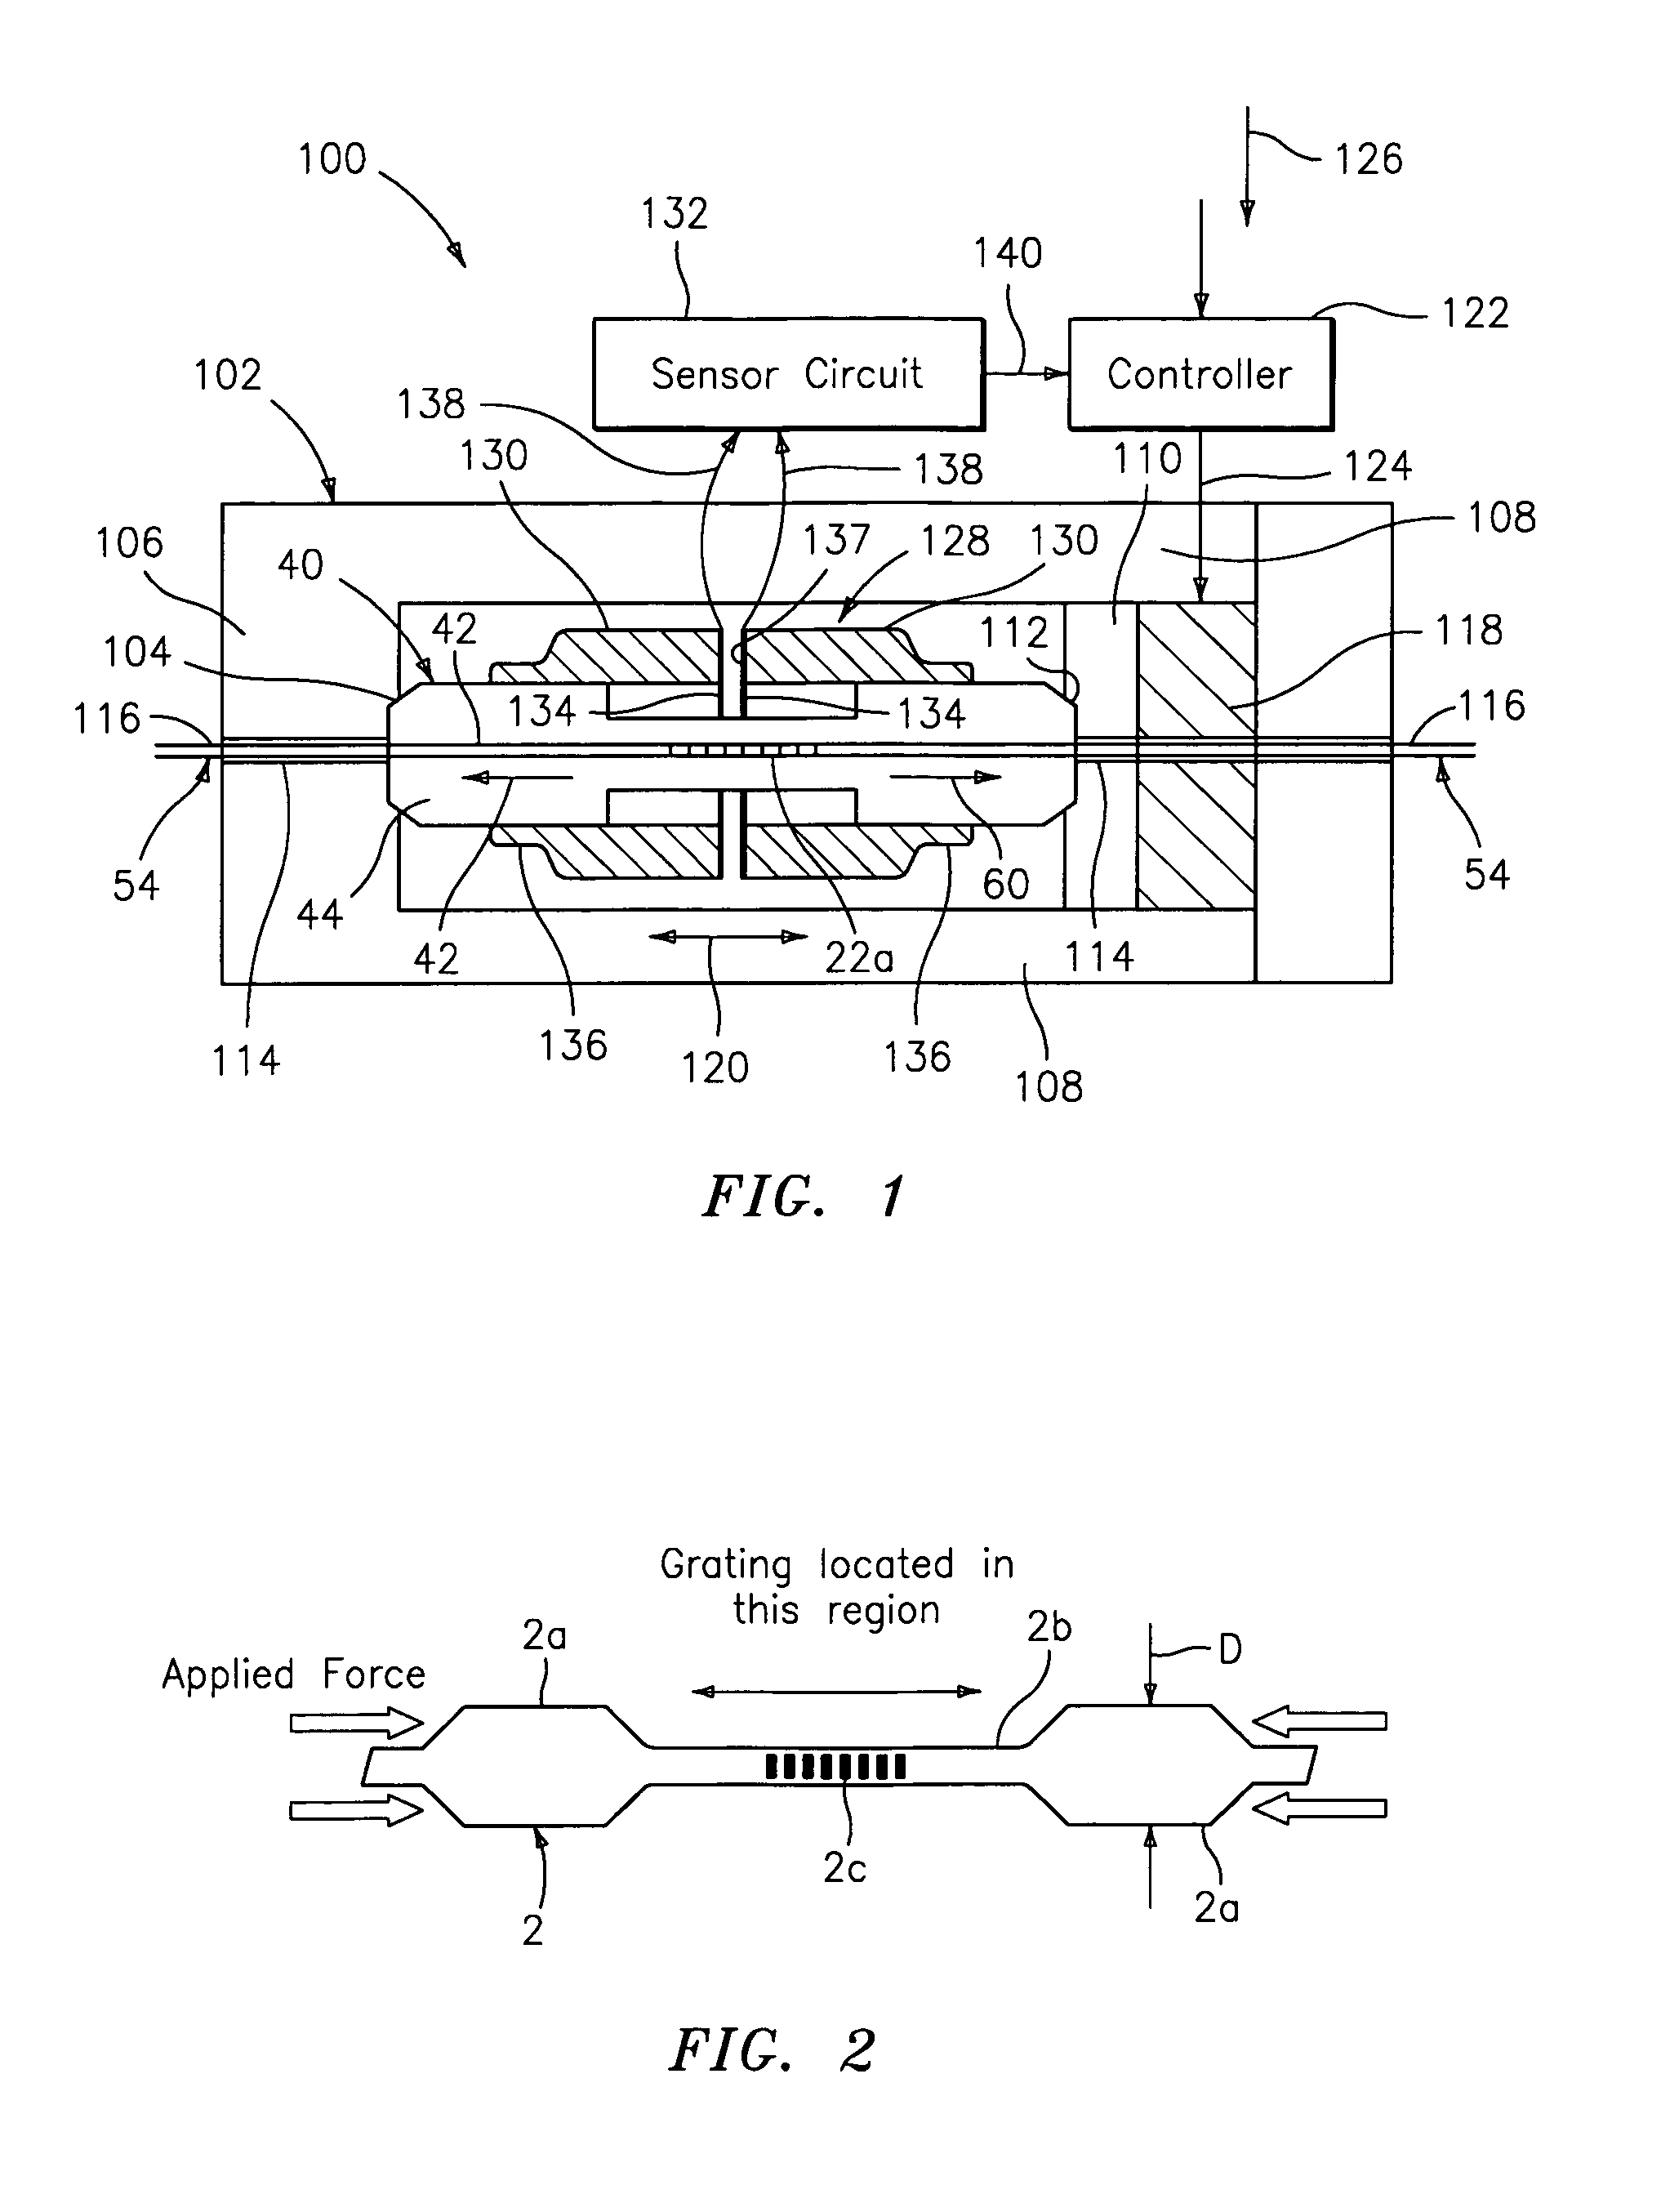 Tunable optical filter having large diameter optical waveguide with bragg grating and being configured for reducing the bulk modulus of compressibility thereof